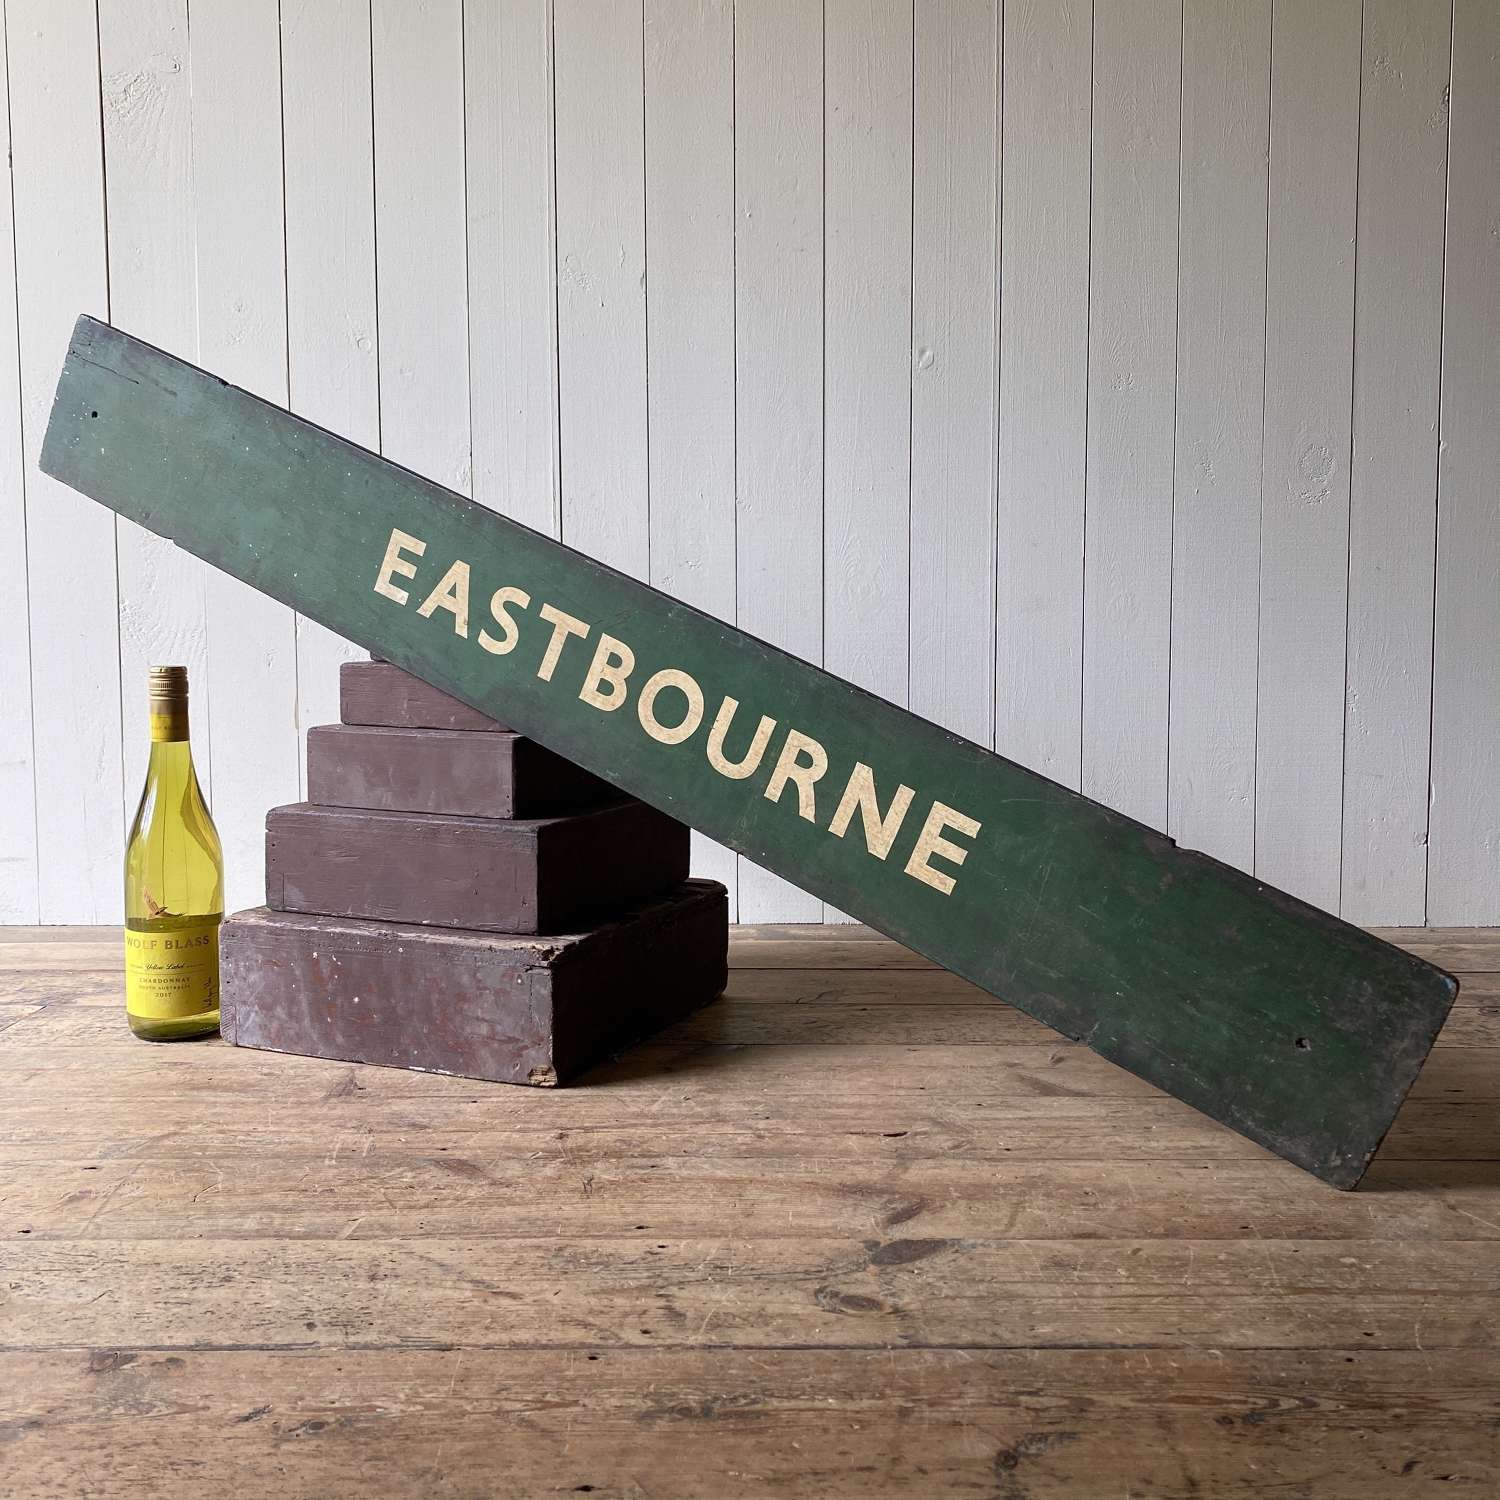 Southern Railway Eastbourne Sign